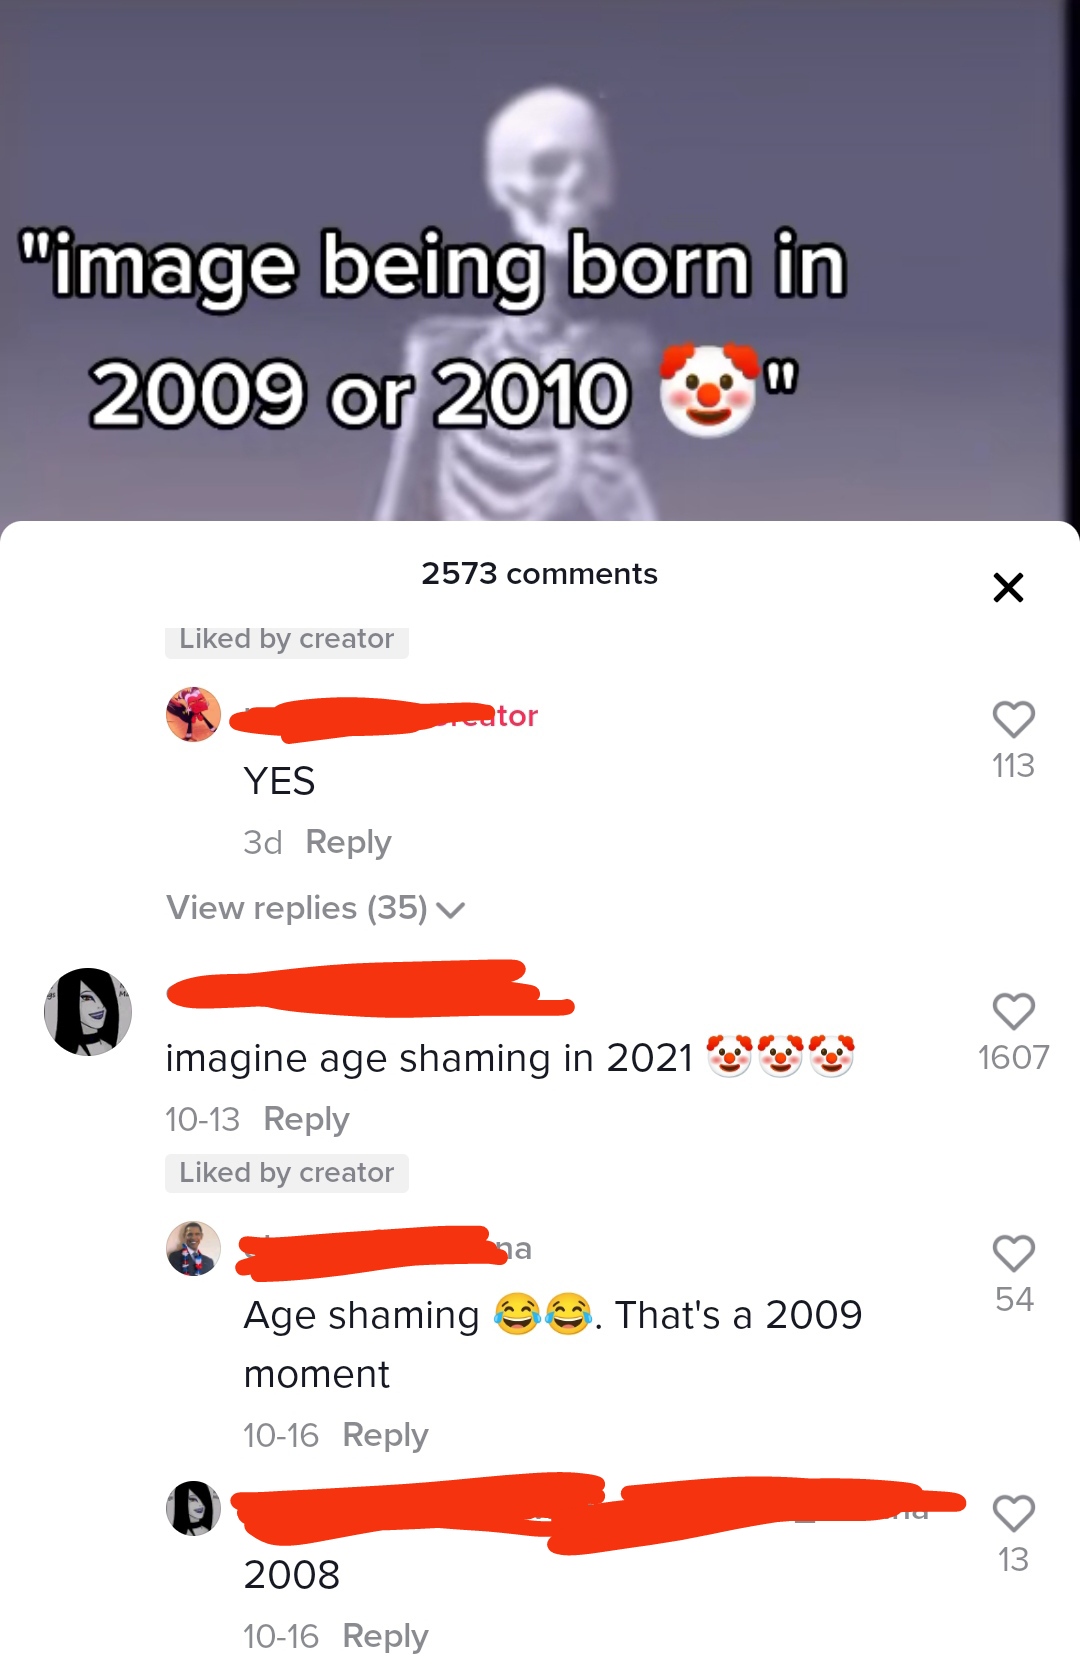 angle - "image being born in 2009 or 2010 2573 X d by creator tor 113 Yes 3d View replies 35 v 1607 imagine age shaming in 2021 1013 d by creator 3. 54 Age shaming 6. That's a 2009 moment 1016 13 2008 1016